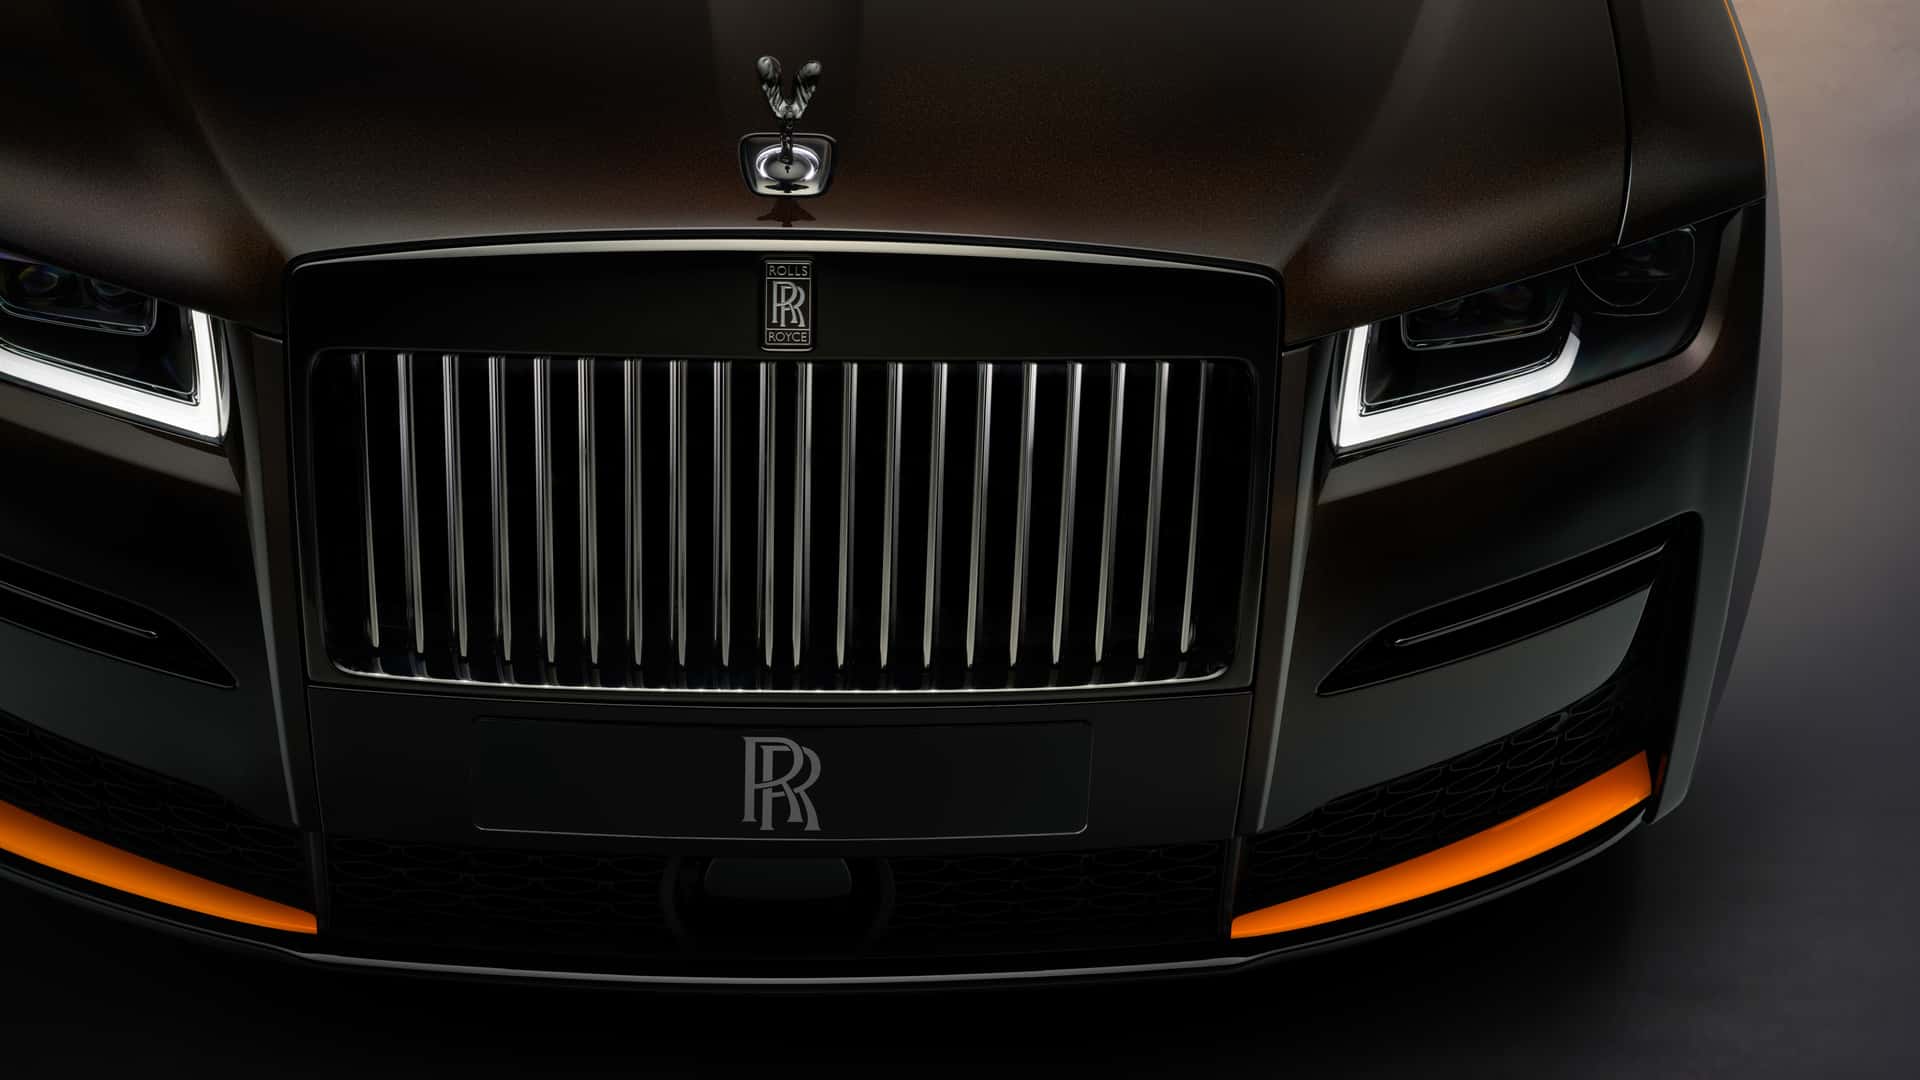 rolls-royce-black-badge-ghost-ékleipsis-private-collection